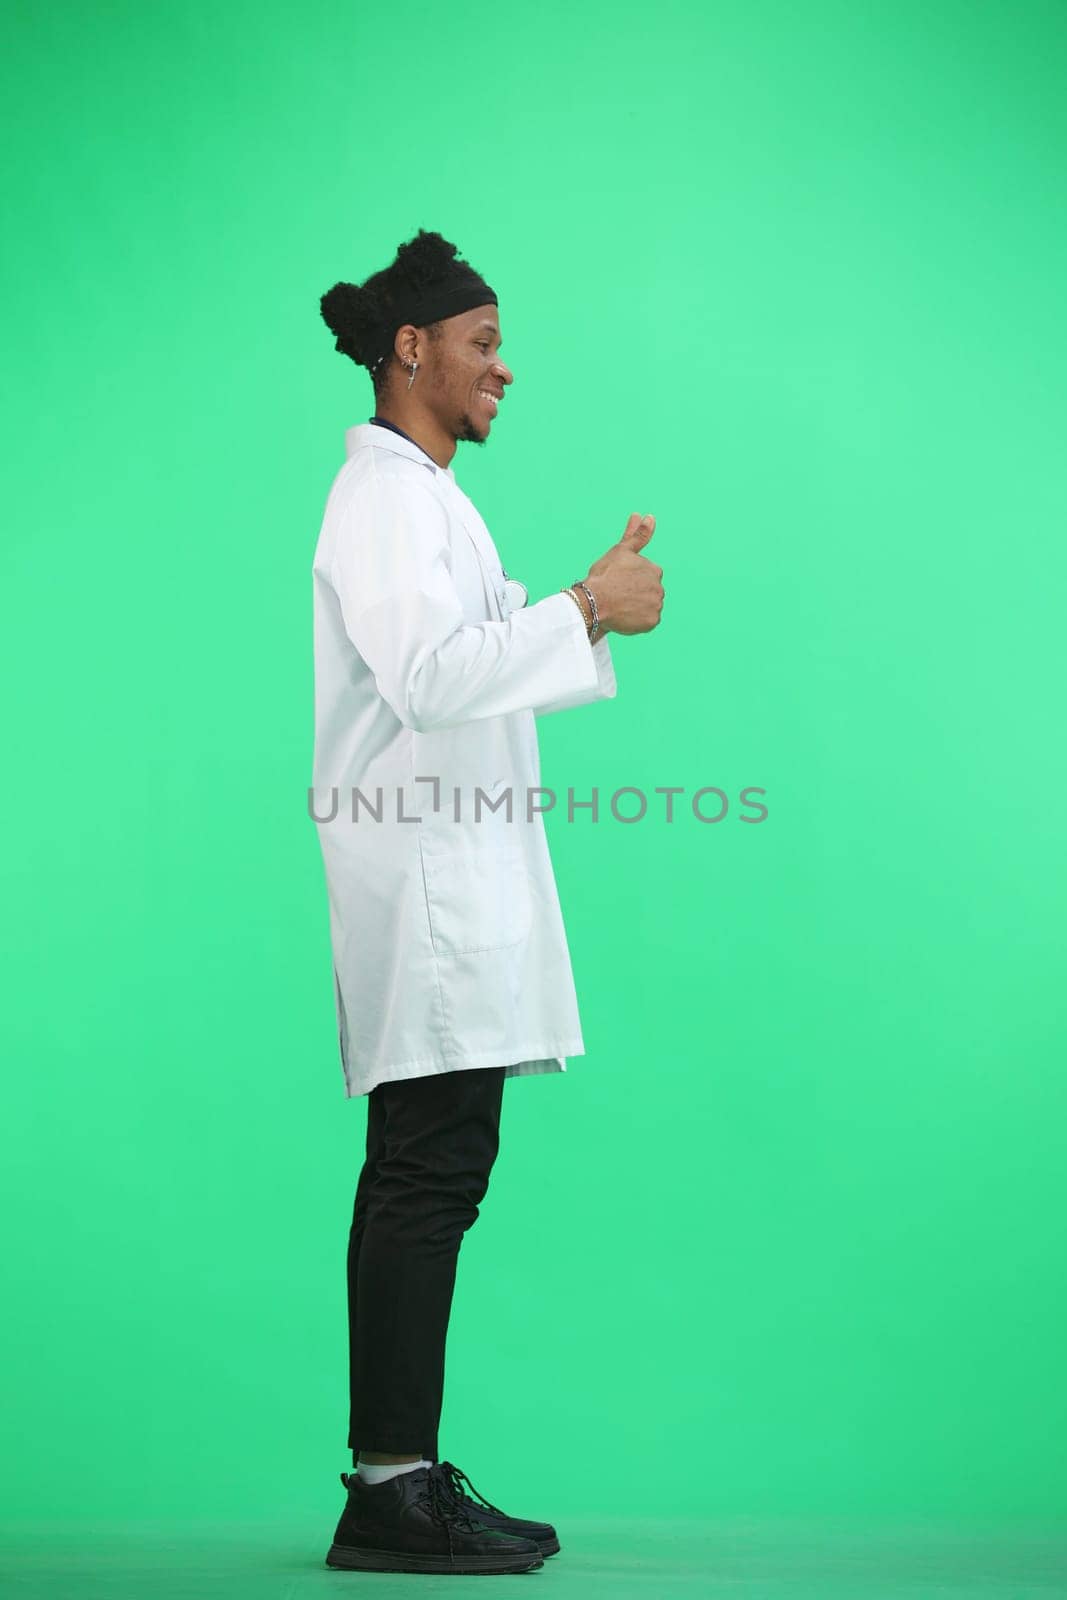 The doctor, in full height, on a green background, shows his fingers up.